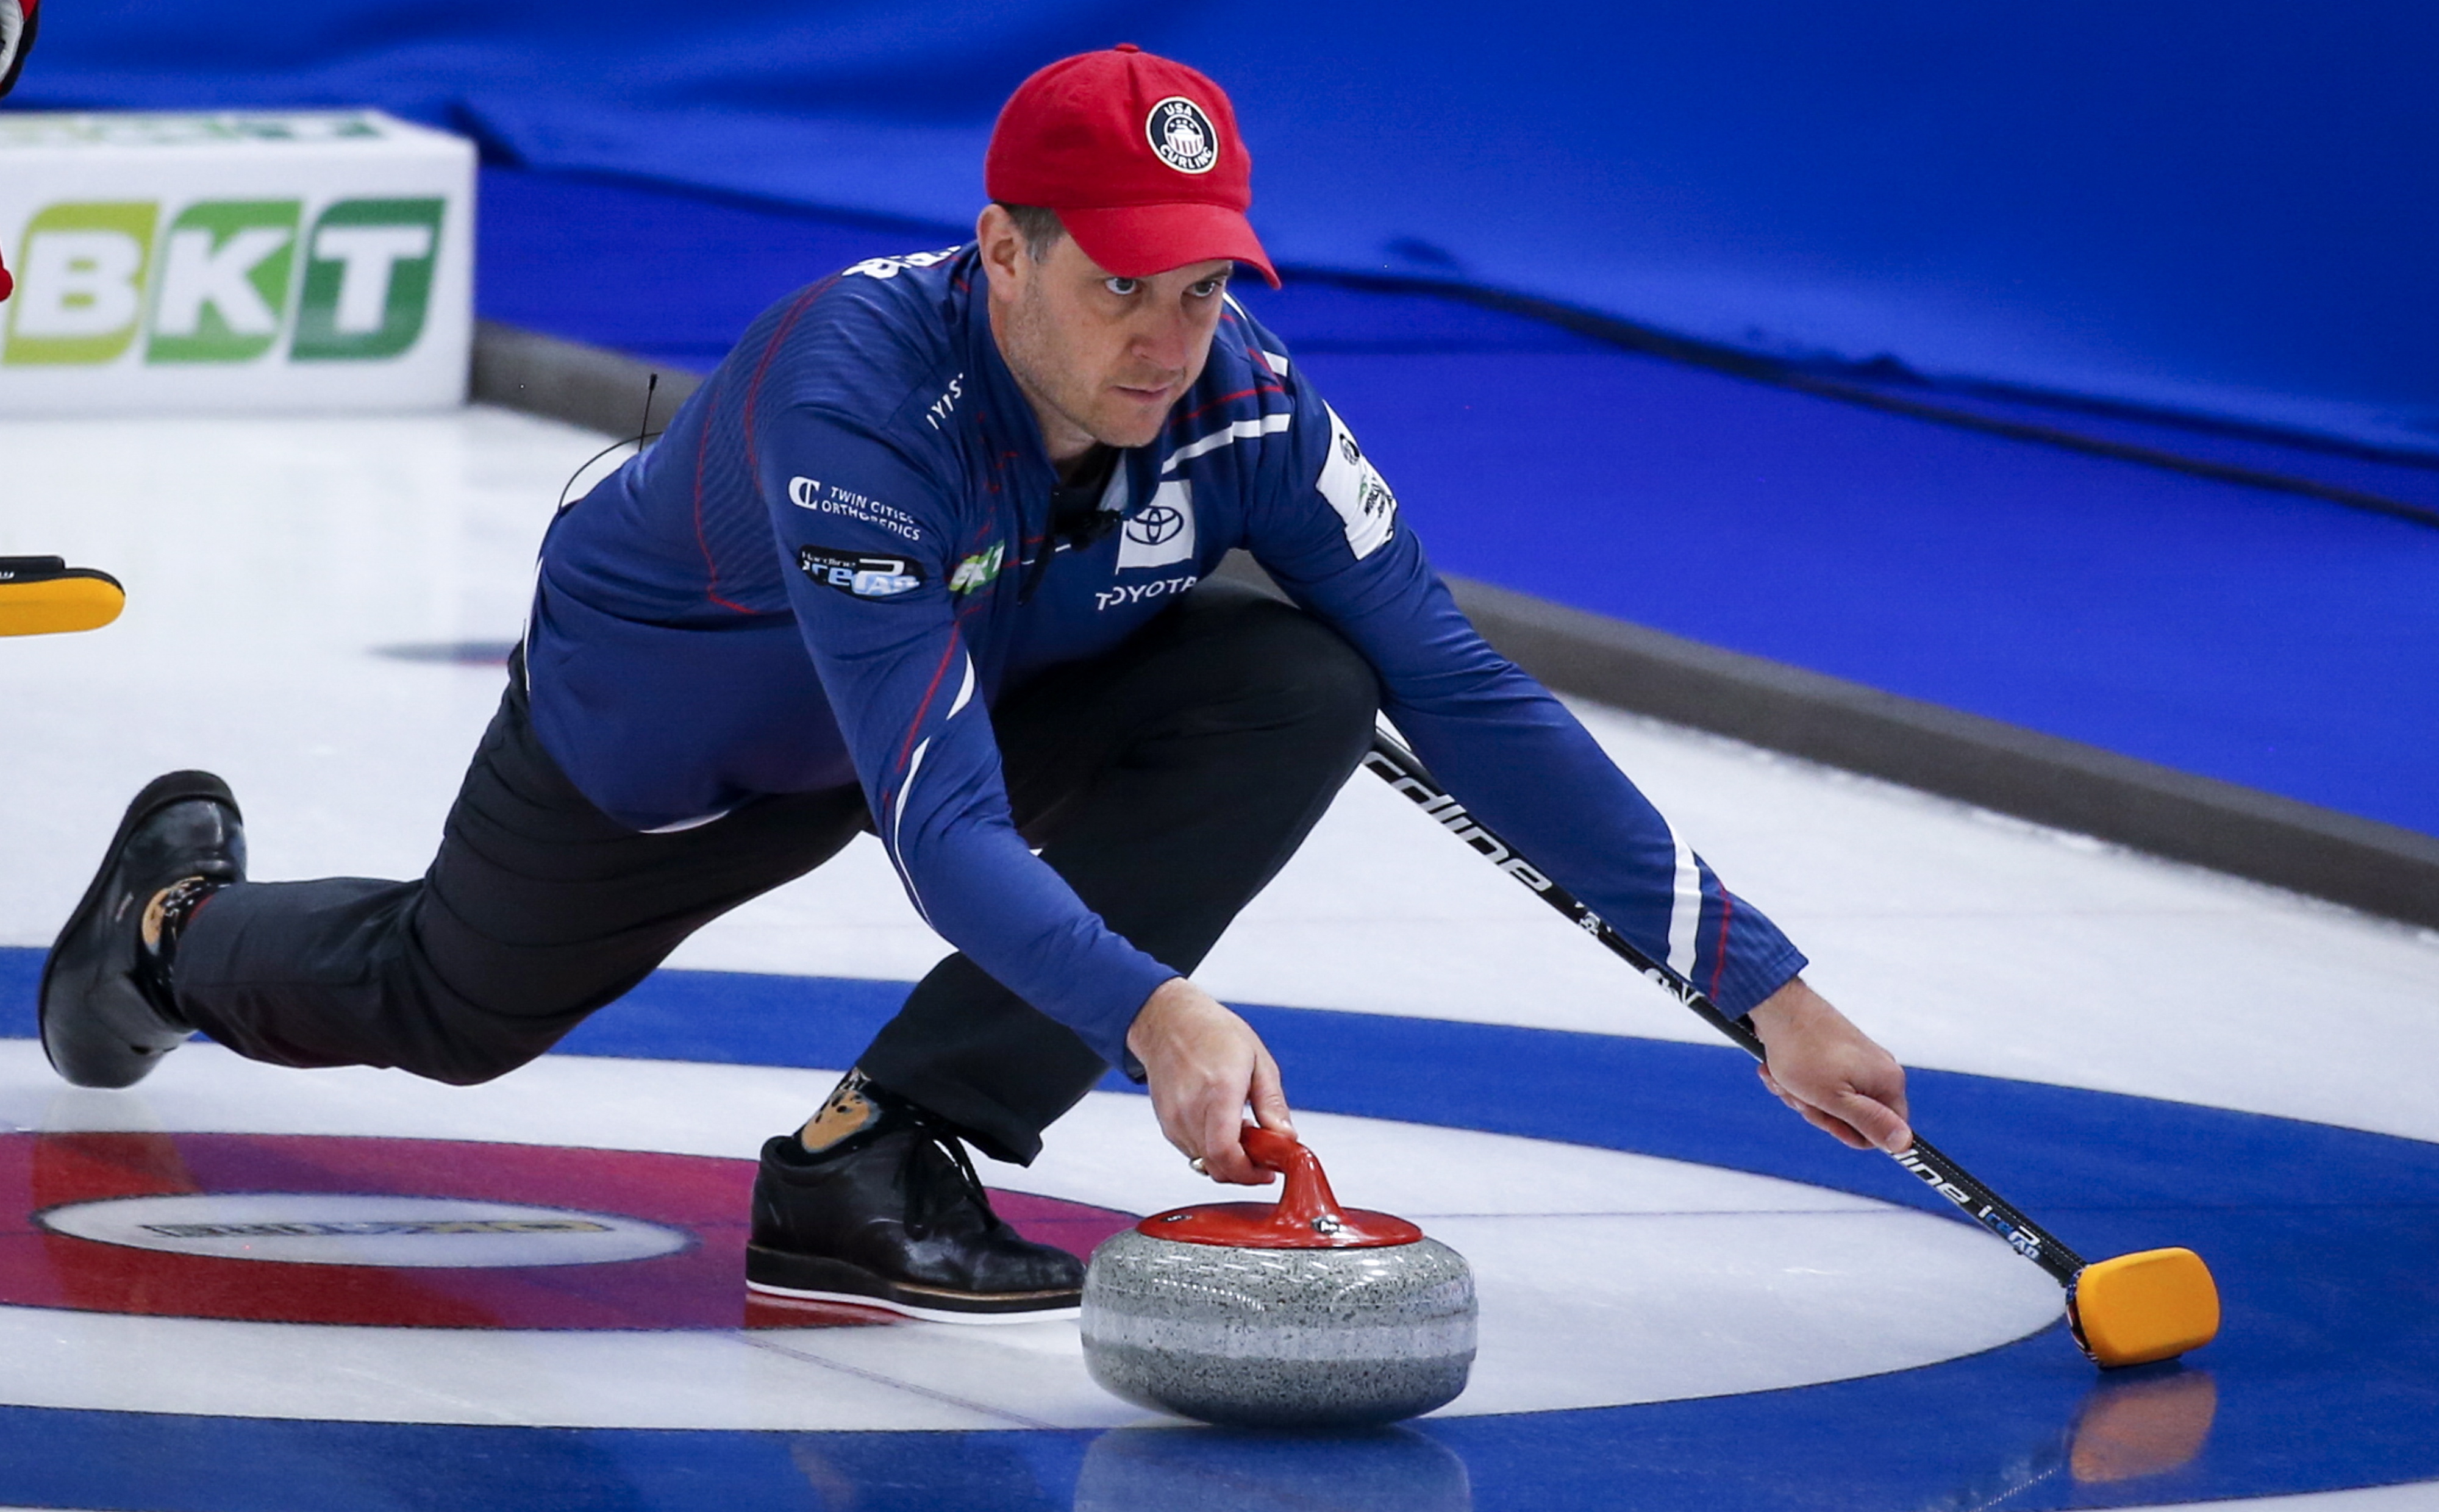 Gold medalist John Shuster to become 1st curler to carry US flag at Olympics